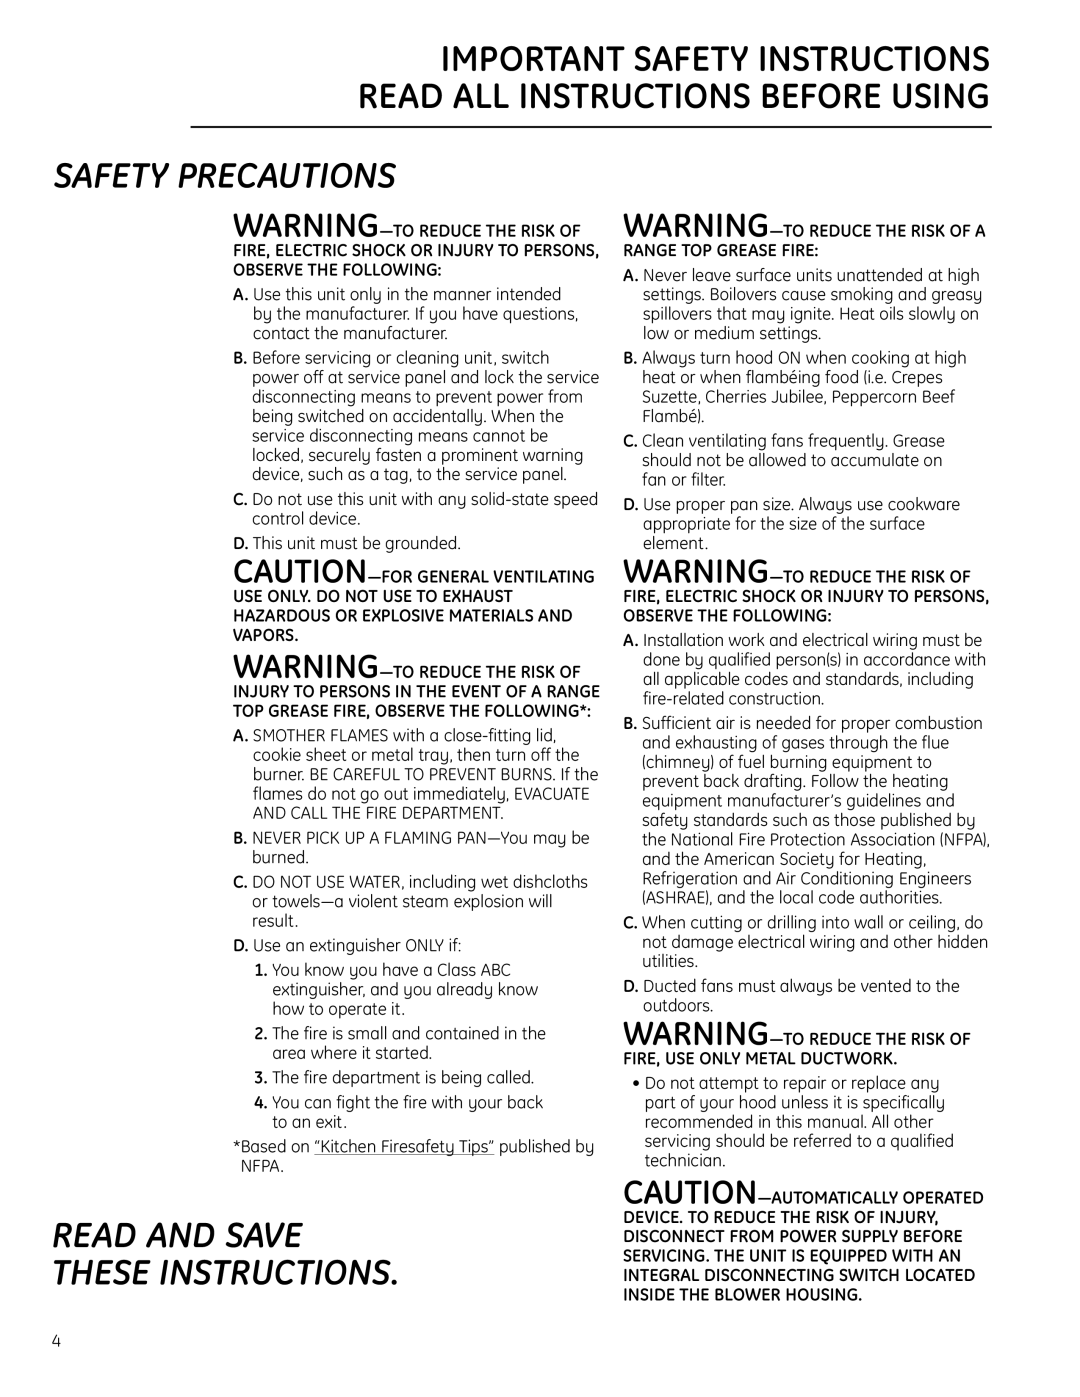 GE 36 Safety Precautions, Read And Save These Instructions, Important Safety Instructions, Warning-To Reduce The Risk Of 